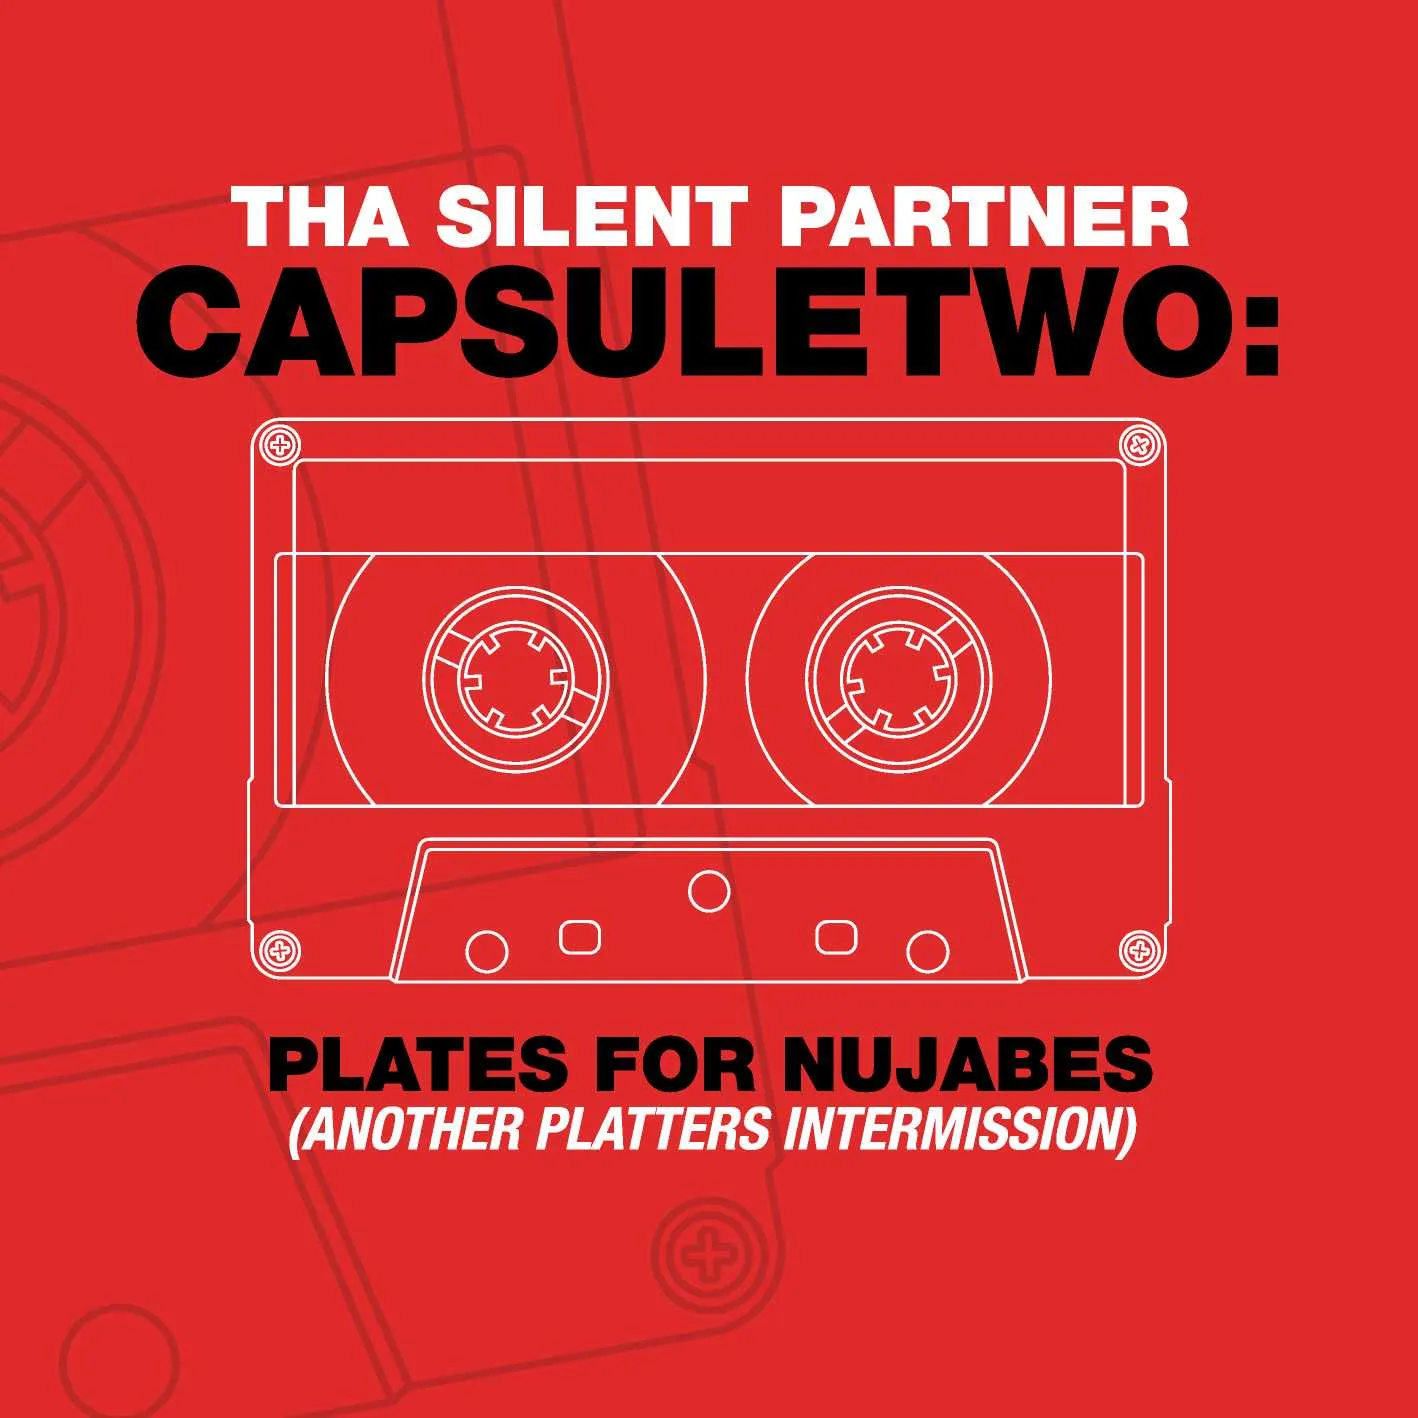 Album cover for “CAPSULETWO: Plates For Nujabes (Another Platters Intermission)” by Tha Silent Partner